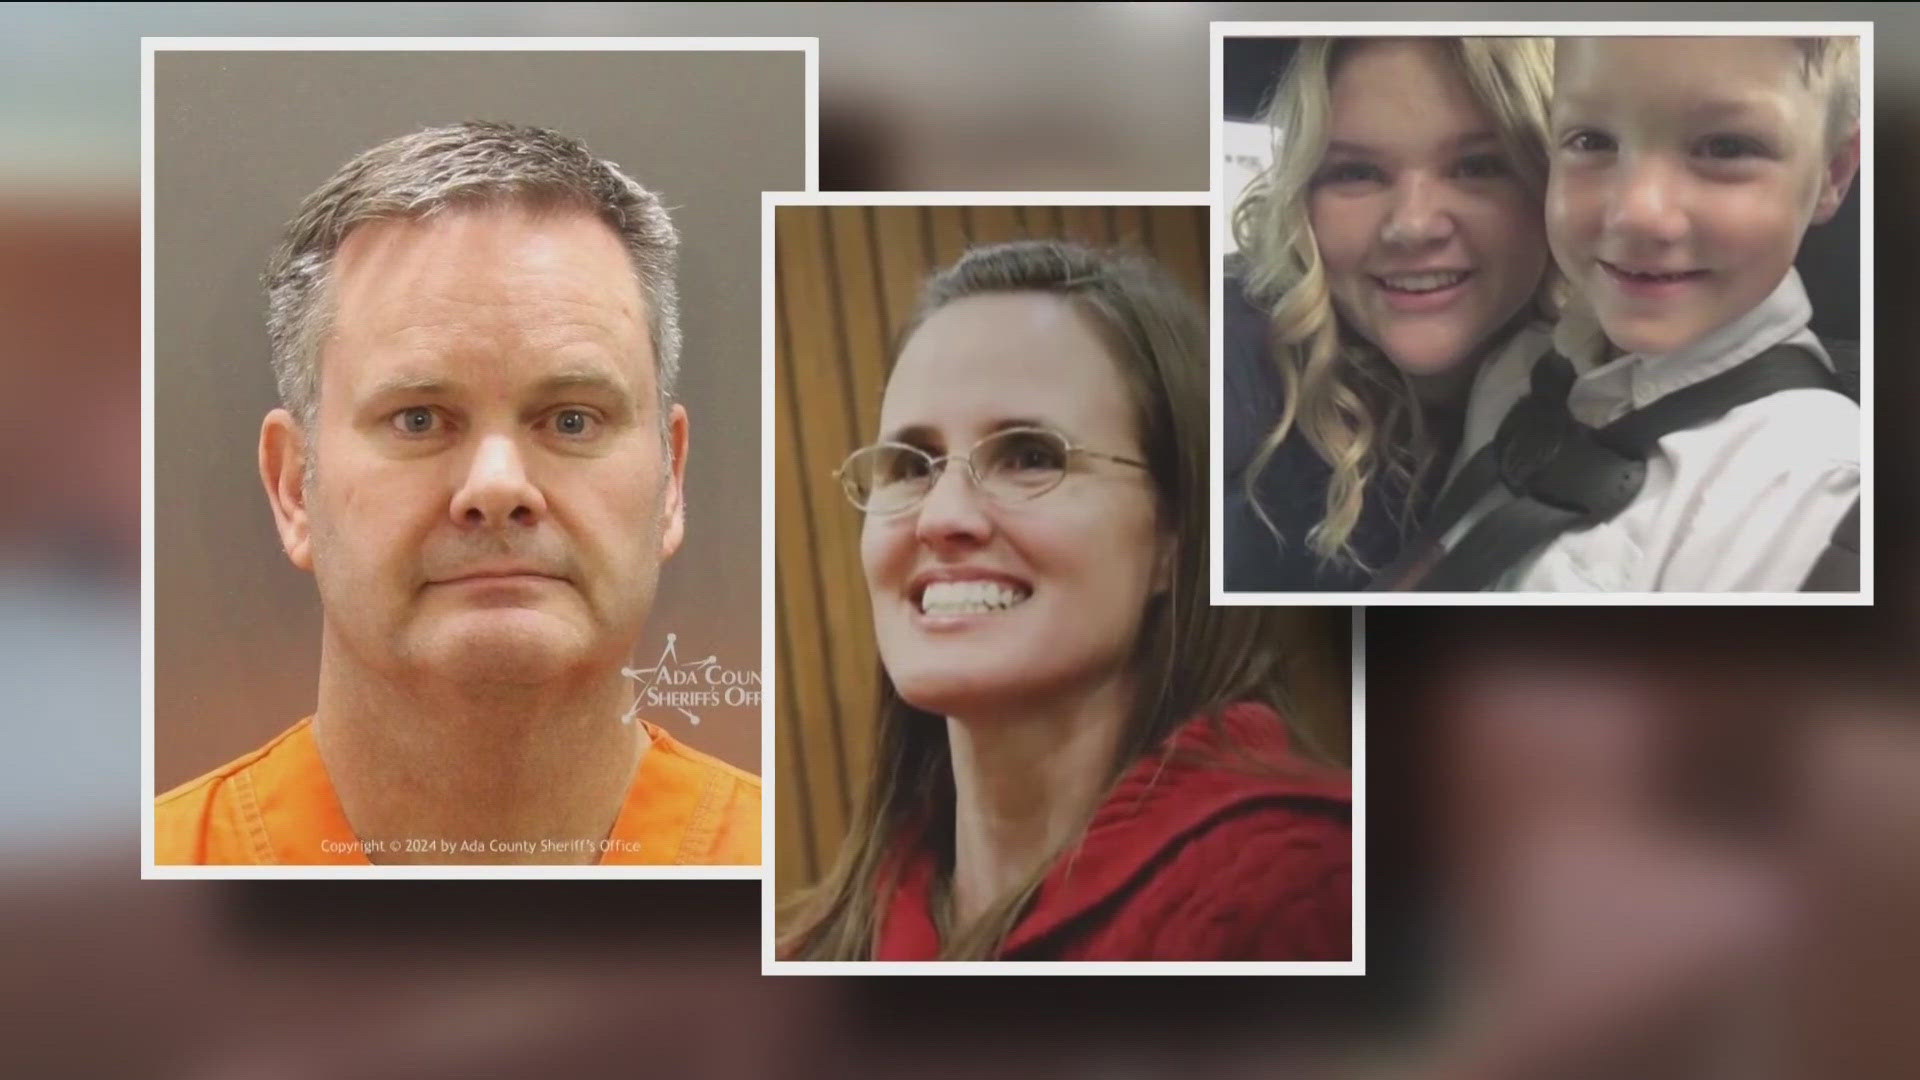 The testimony from Chad Daybell 's children on Monday marked the start of his legal defense. Five more witnesses were called to the stand on Tuesday.